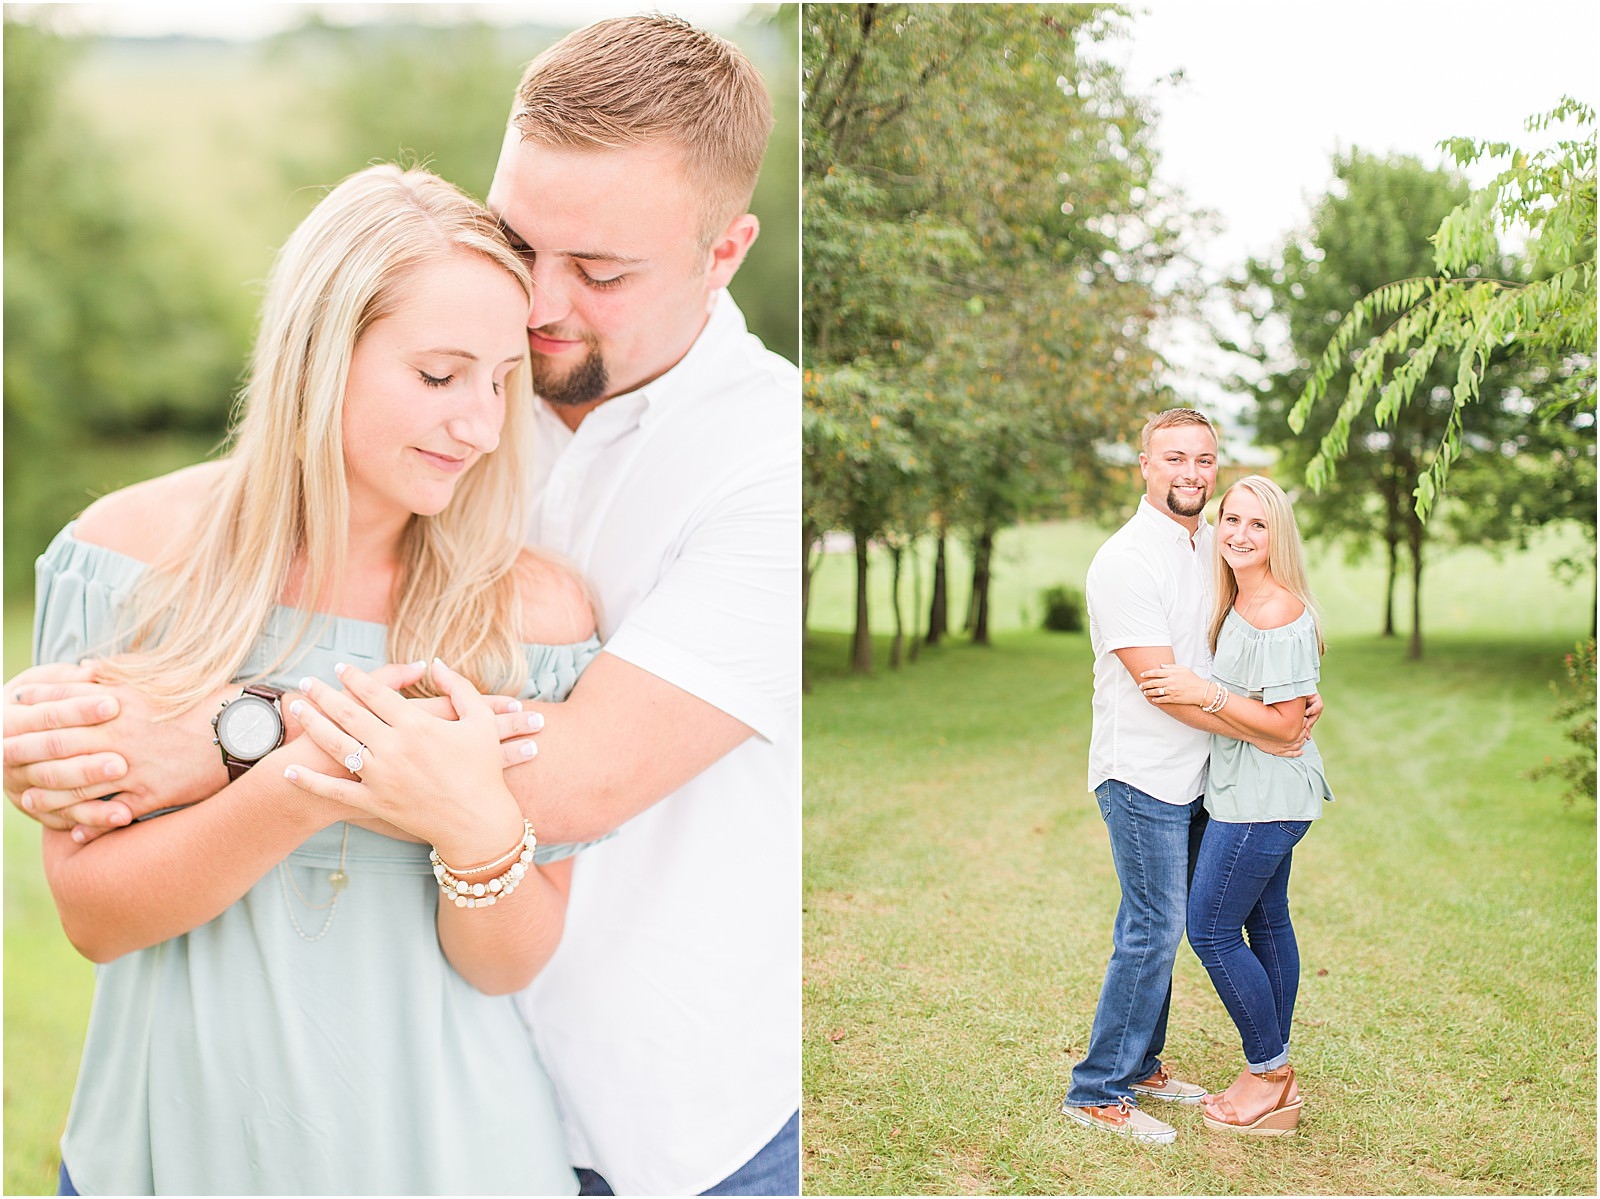 Lauren and Bryce | The Corner House B&ed and Breakfast Engagement Session | Bret and Brandie Photography 002.jpg